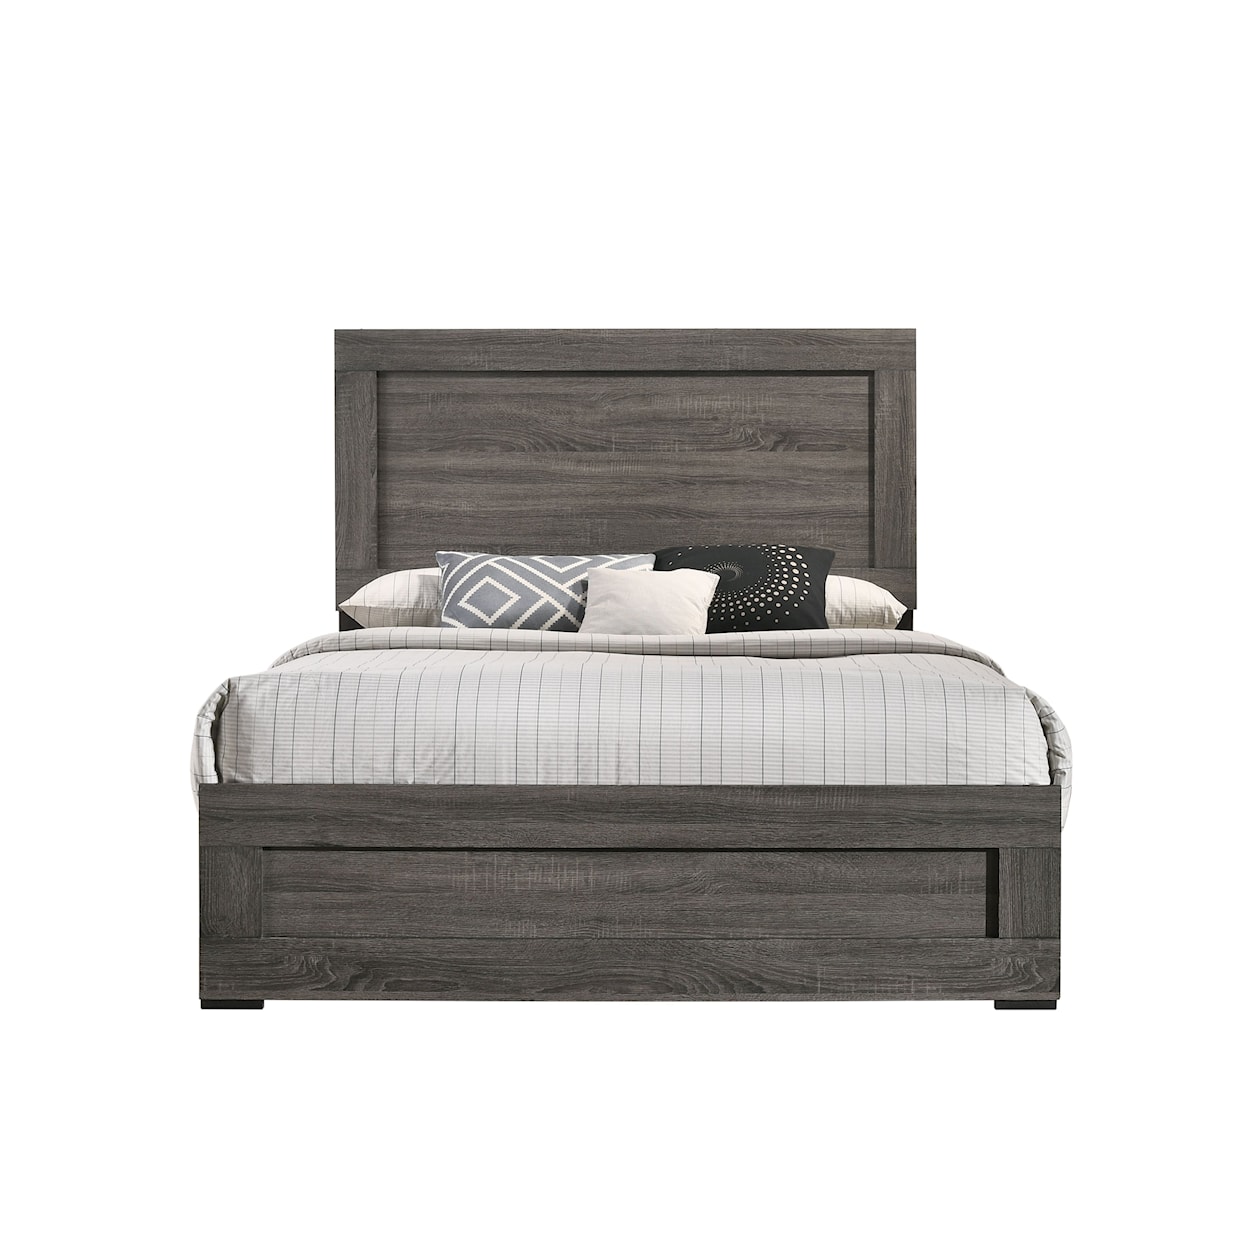 Lifestyle Andre ANDRE GREY FULL BED |